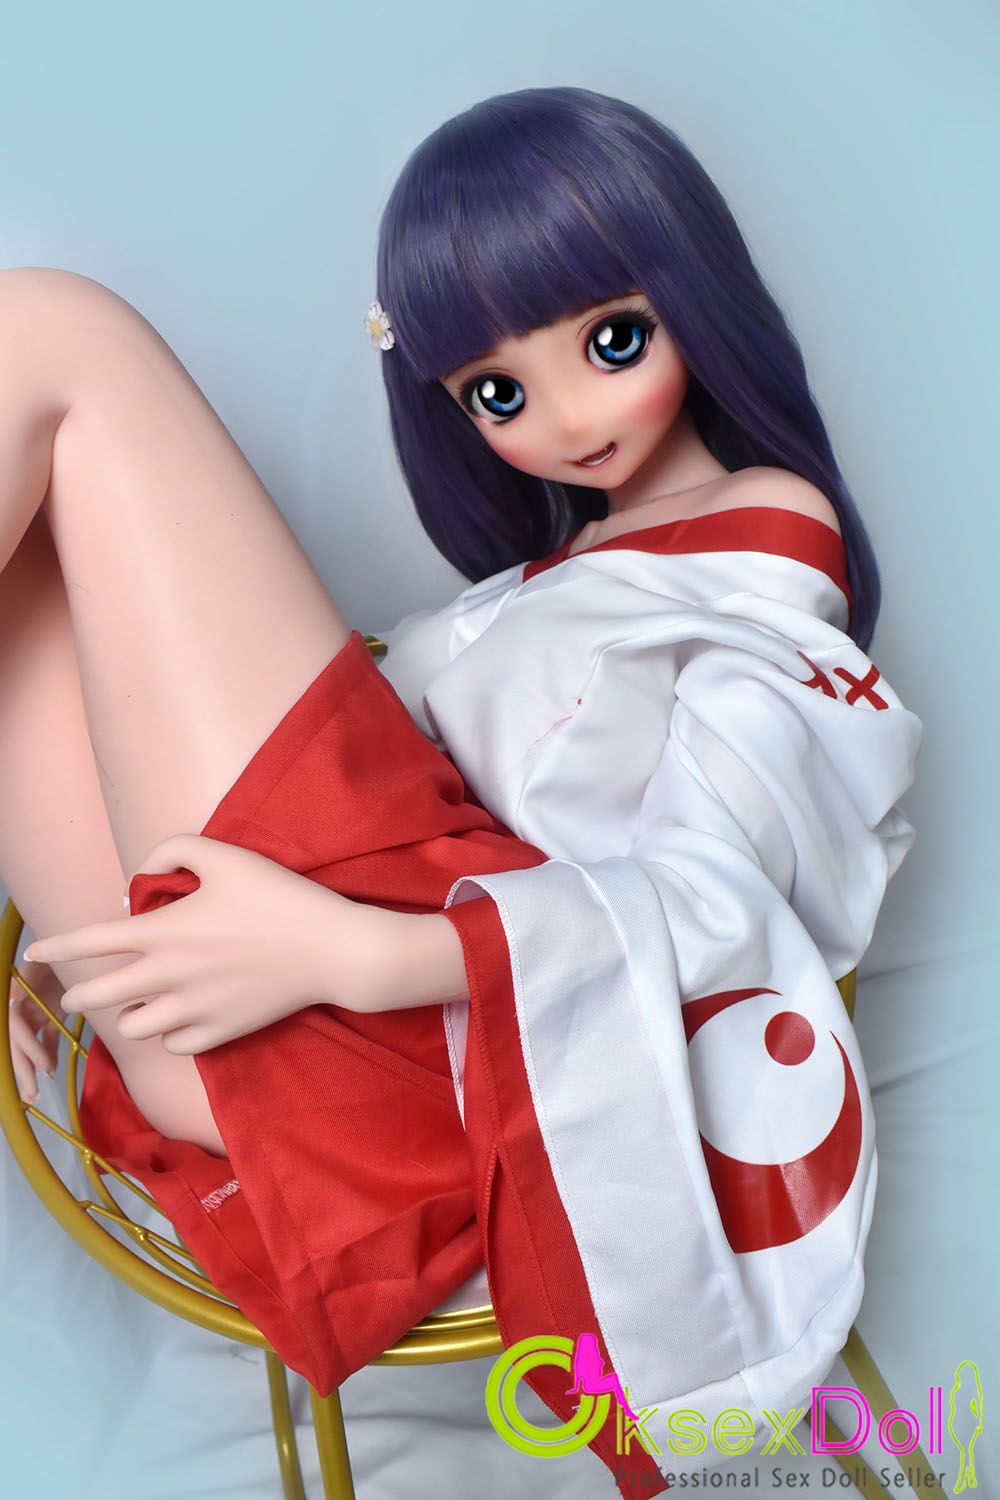 Horny Girl Real Dolls pic